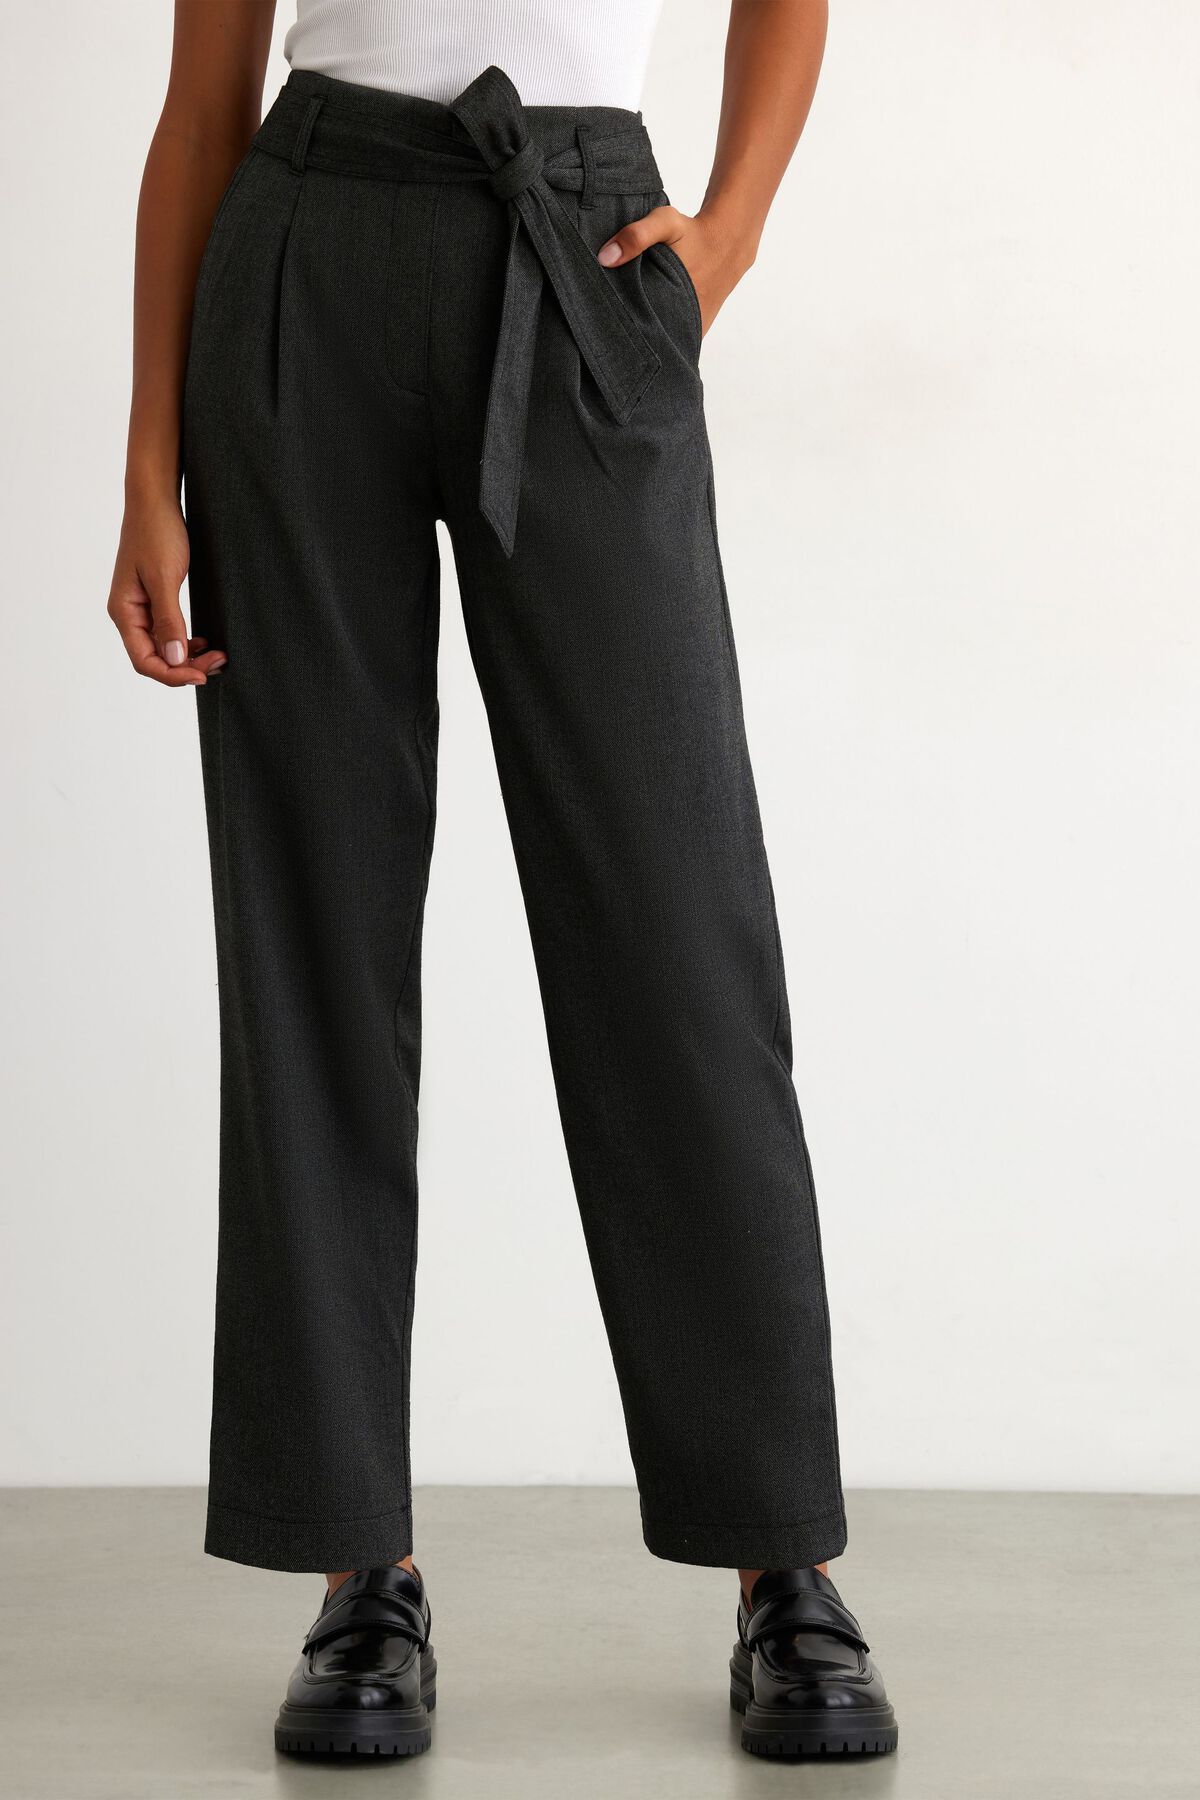 Dynamite Paperbag Pant With Belt. 2